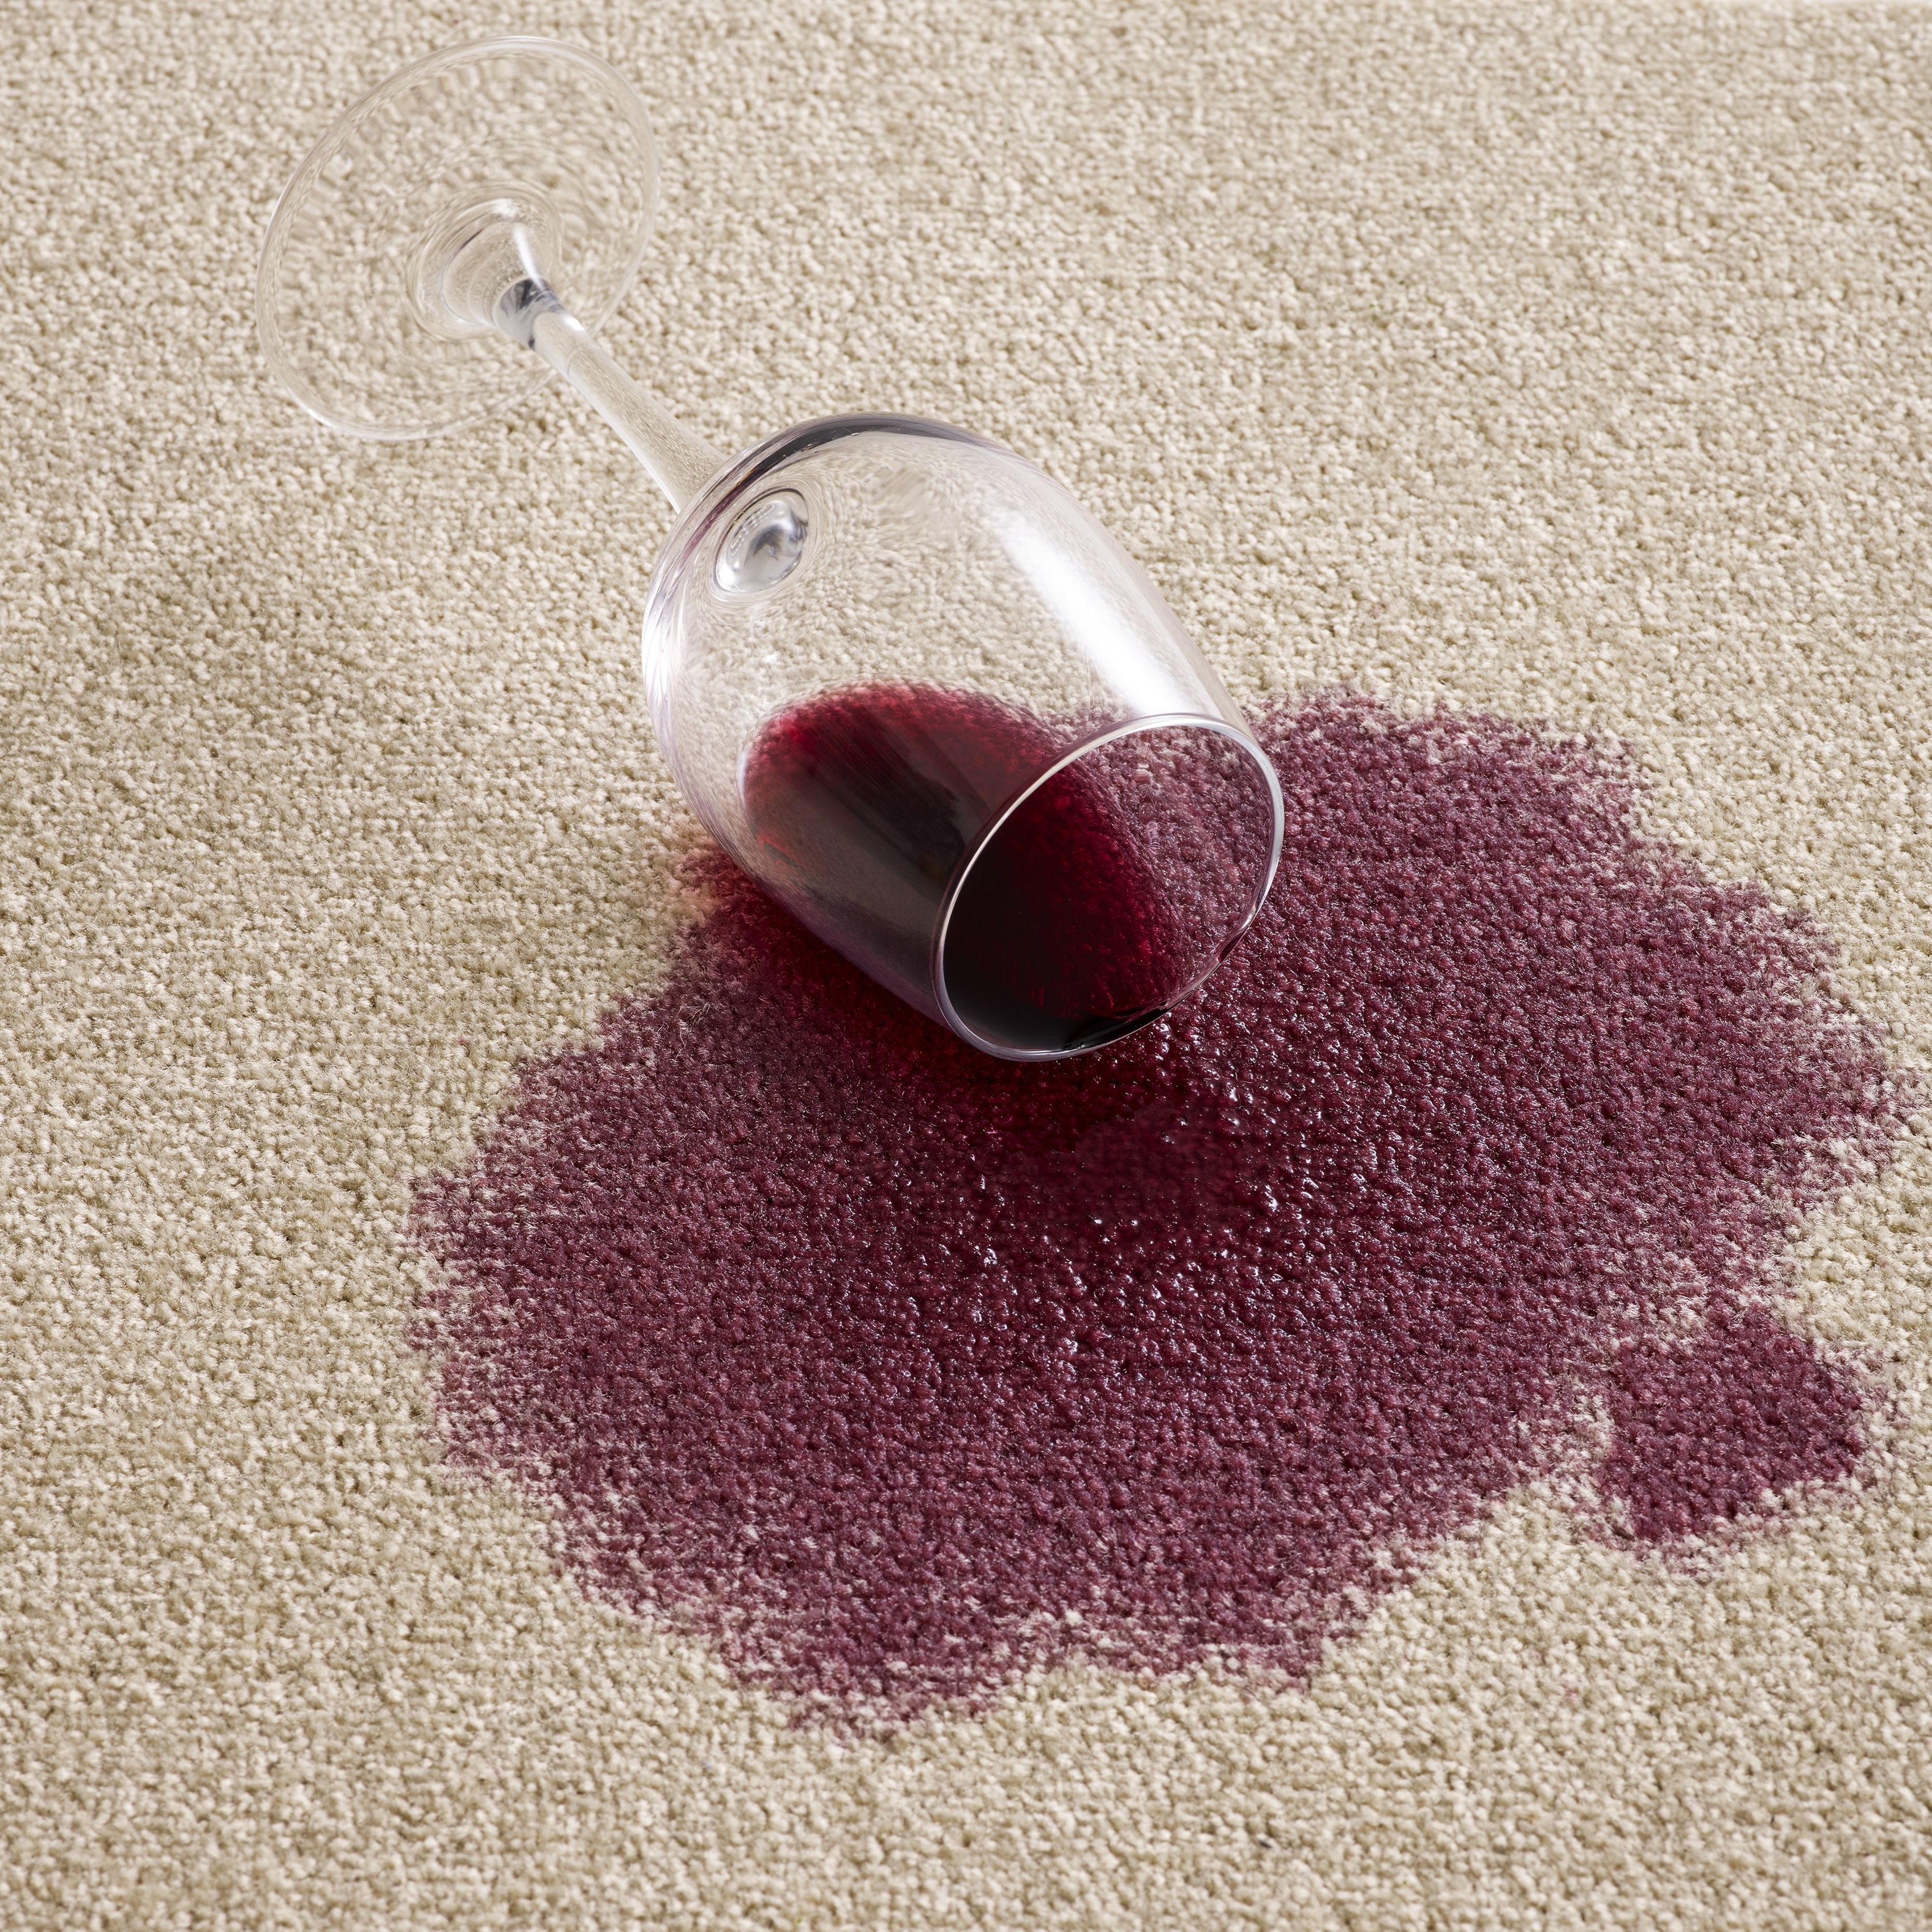 How To Remove Stains Stain Buster, How To Get Red Wine Stain Out Of Leather Shoes